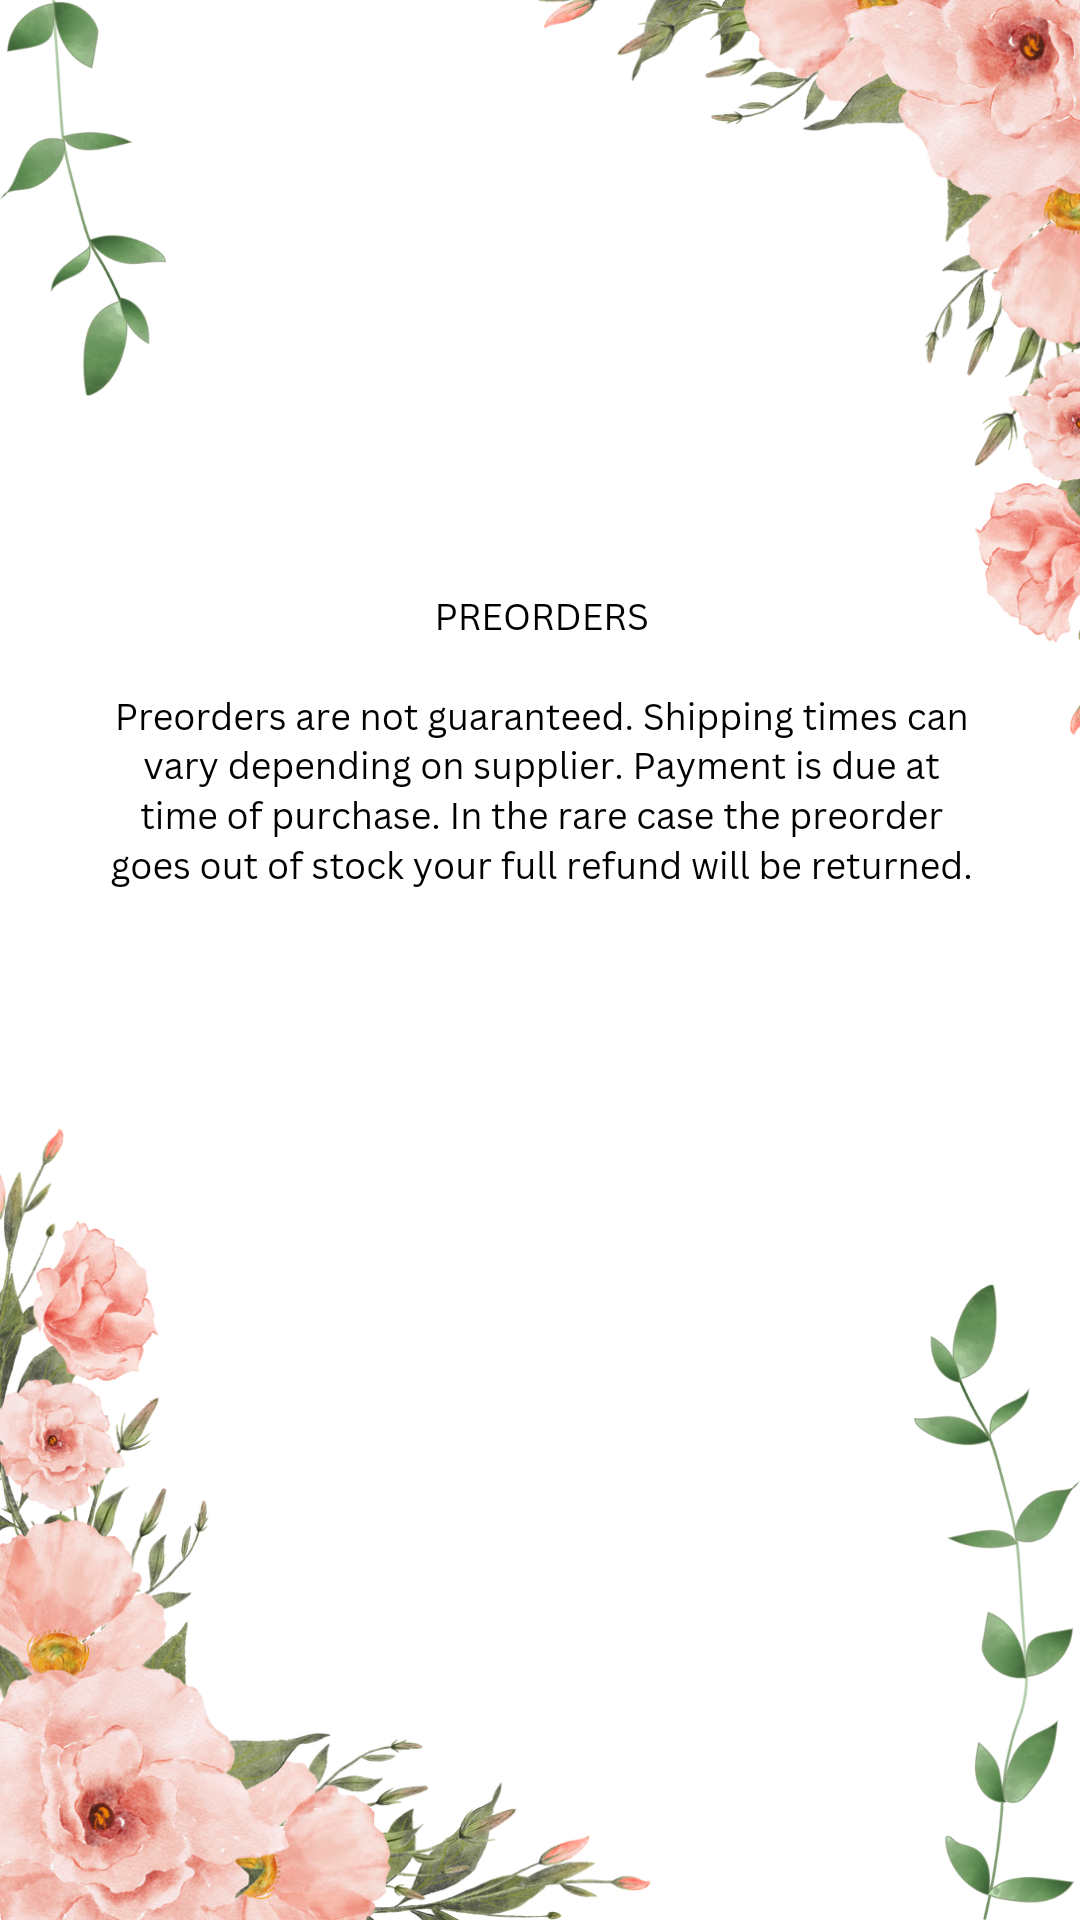 Preorders policy